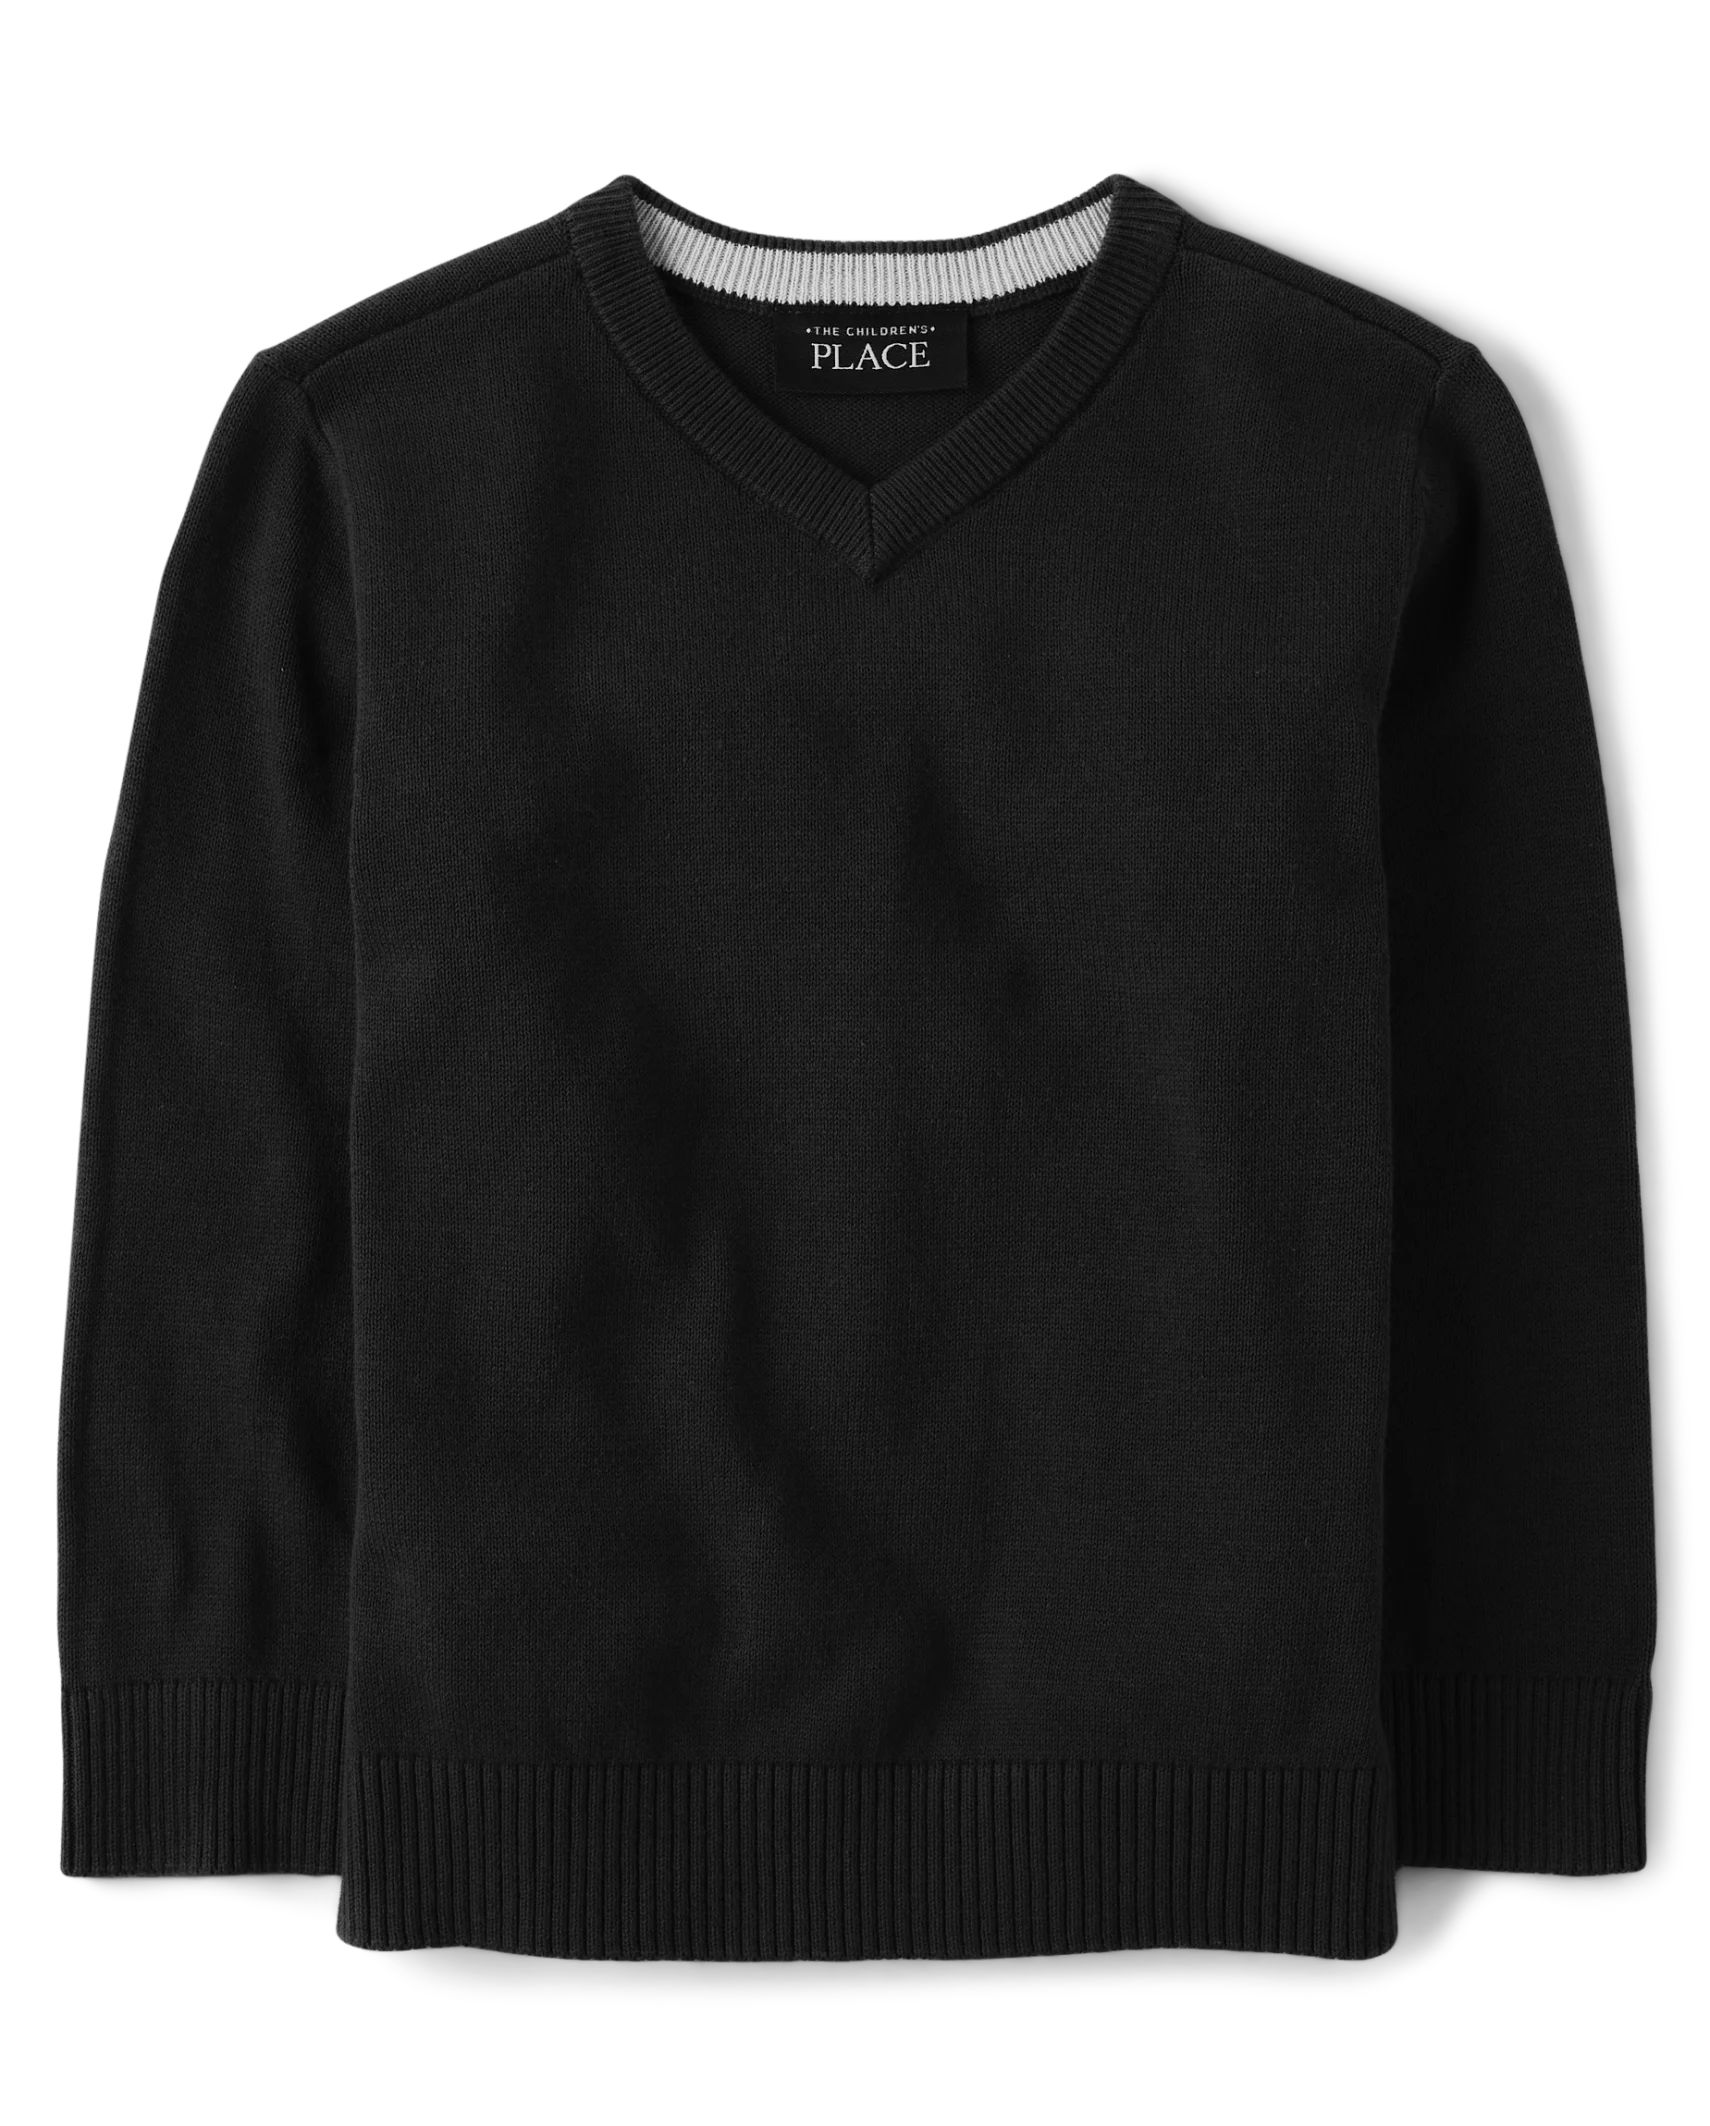 Baby And Toddler Boys V-Neck Sweater - black | The Children's Place